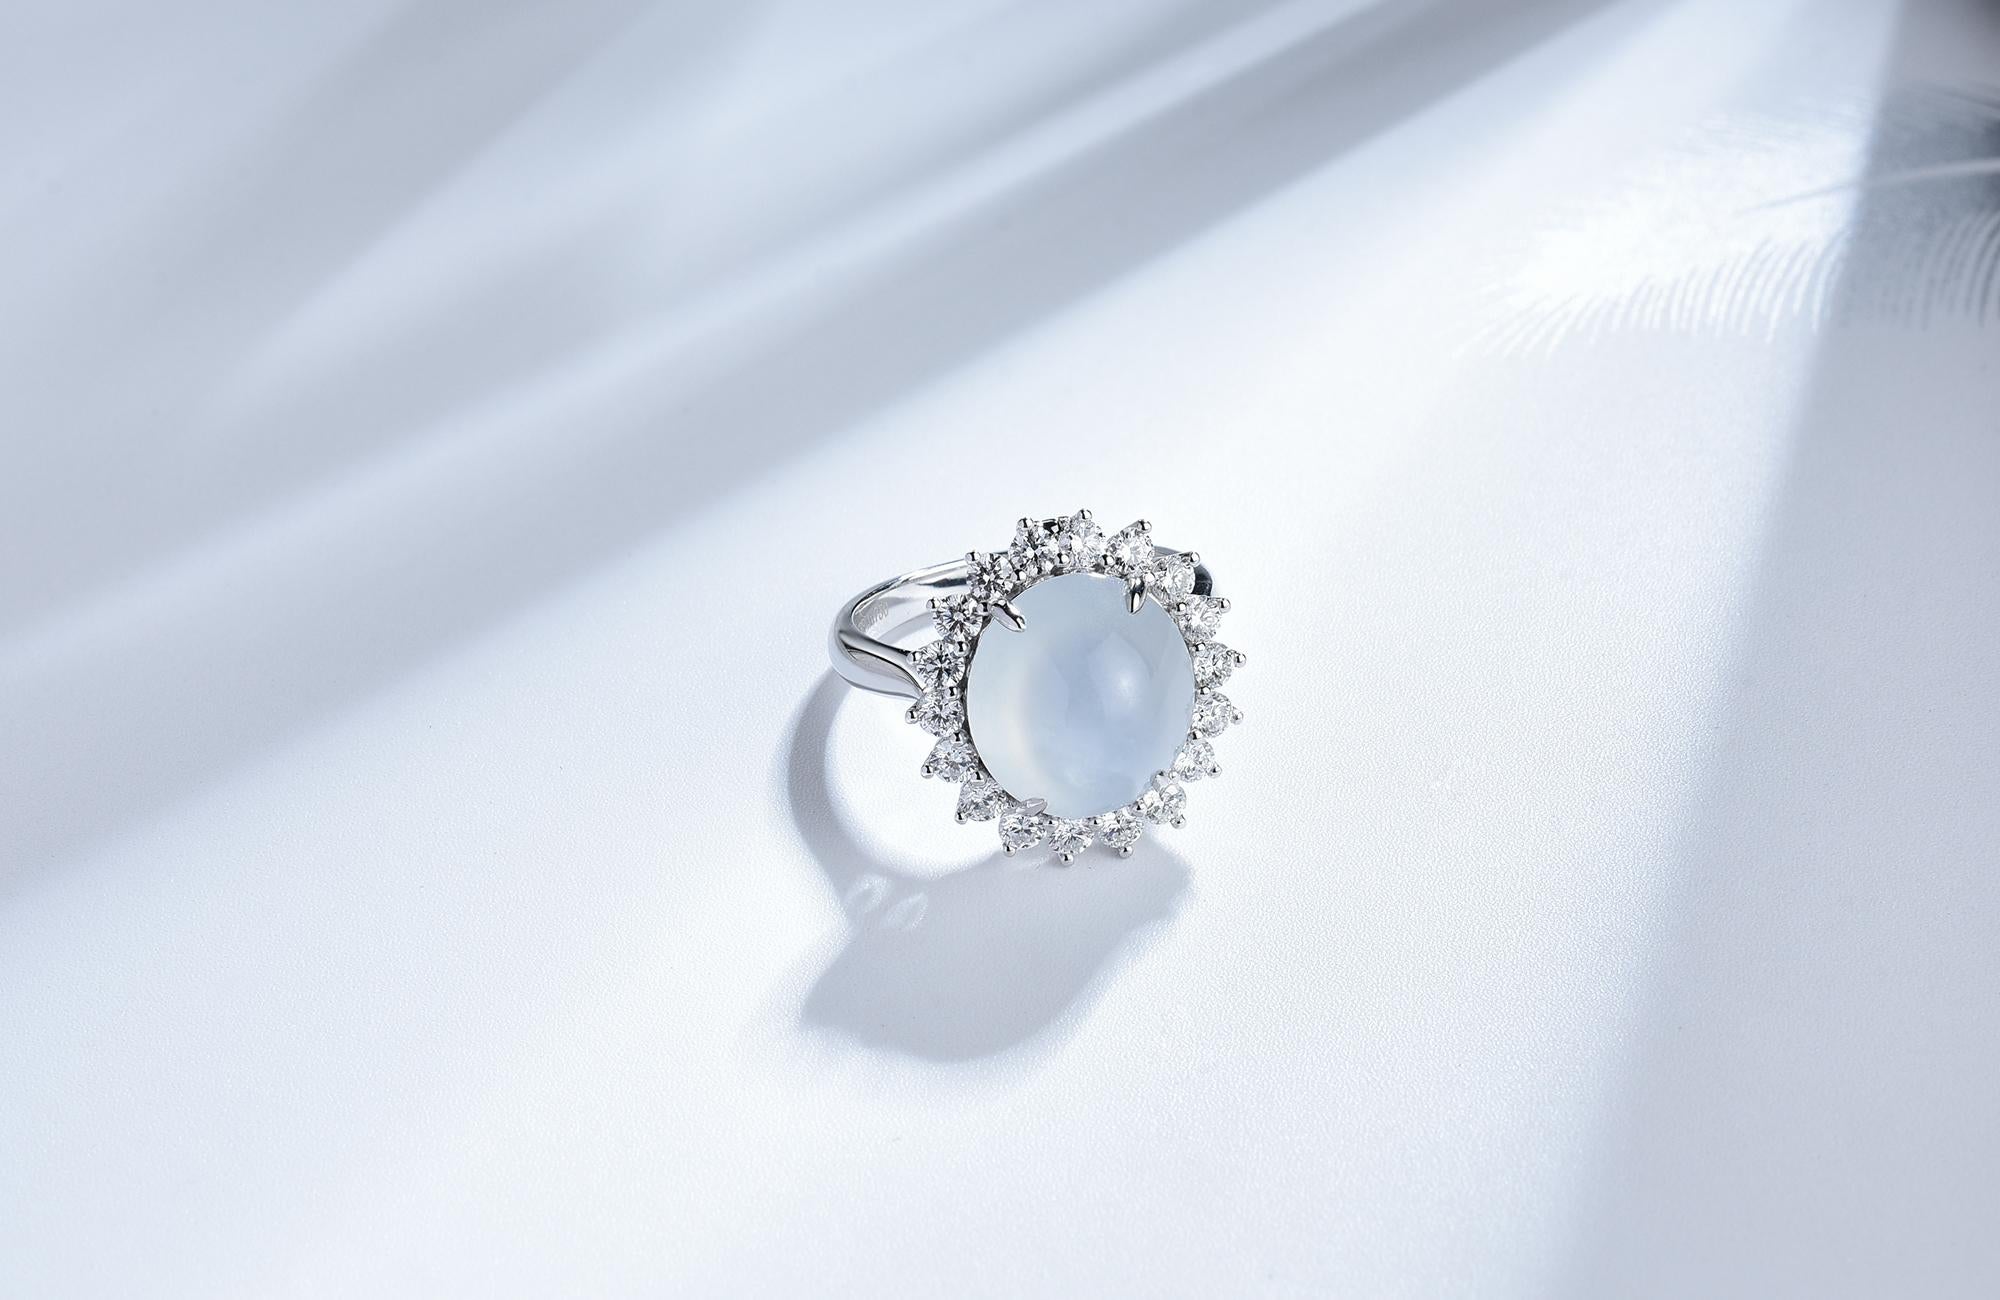 This is a convertible icy Jadeite ring/pendant. This Ring can be converted into a pendant. The near colourless icy jadeite is surrounded by diamond and forms a vintage cluster design. The jadeite can be detached from the ring and becomes a pendant.